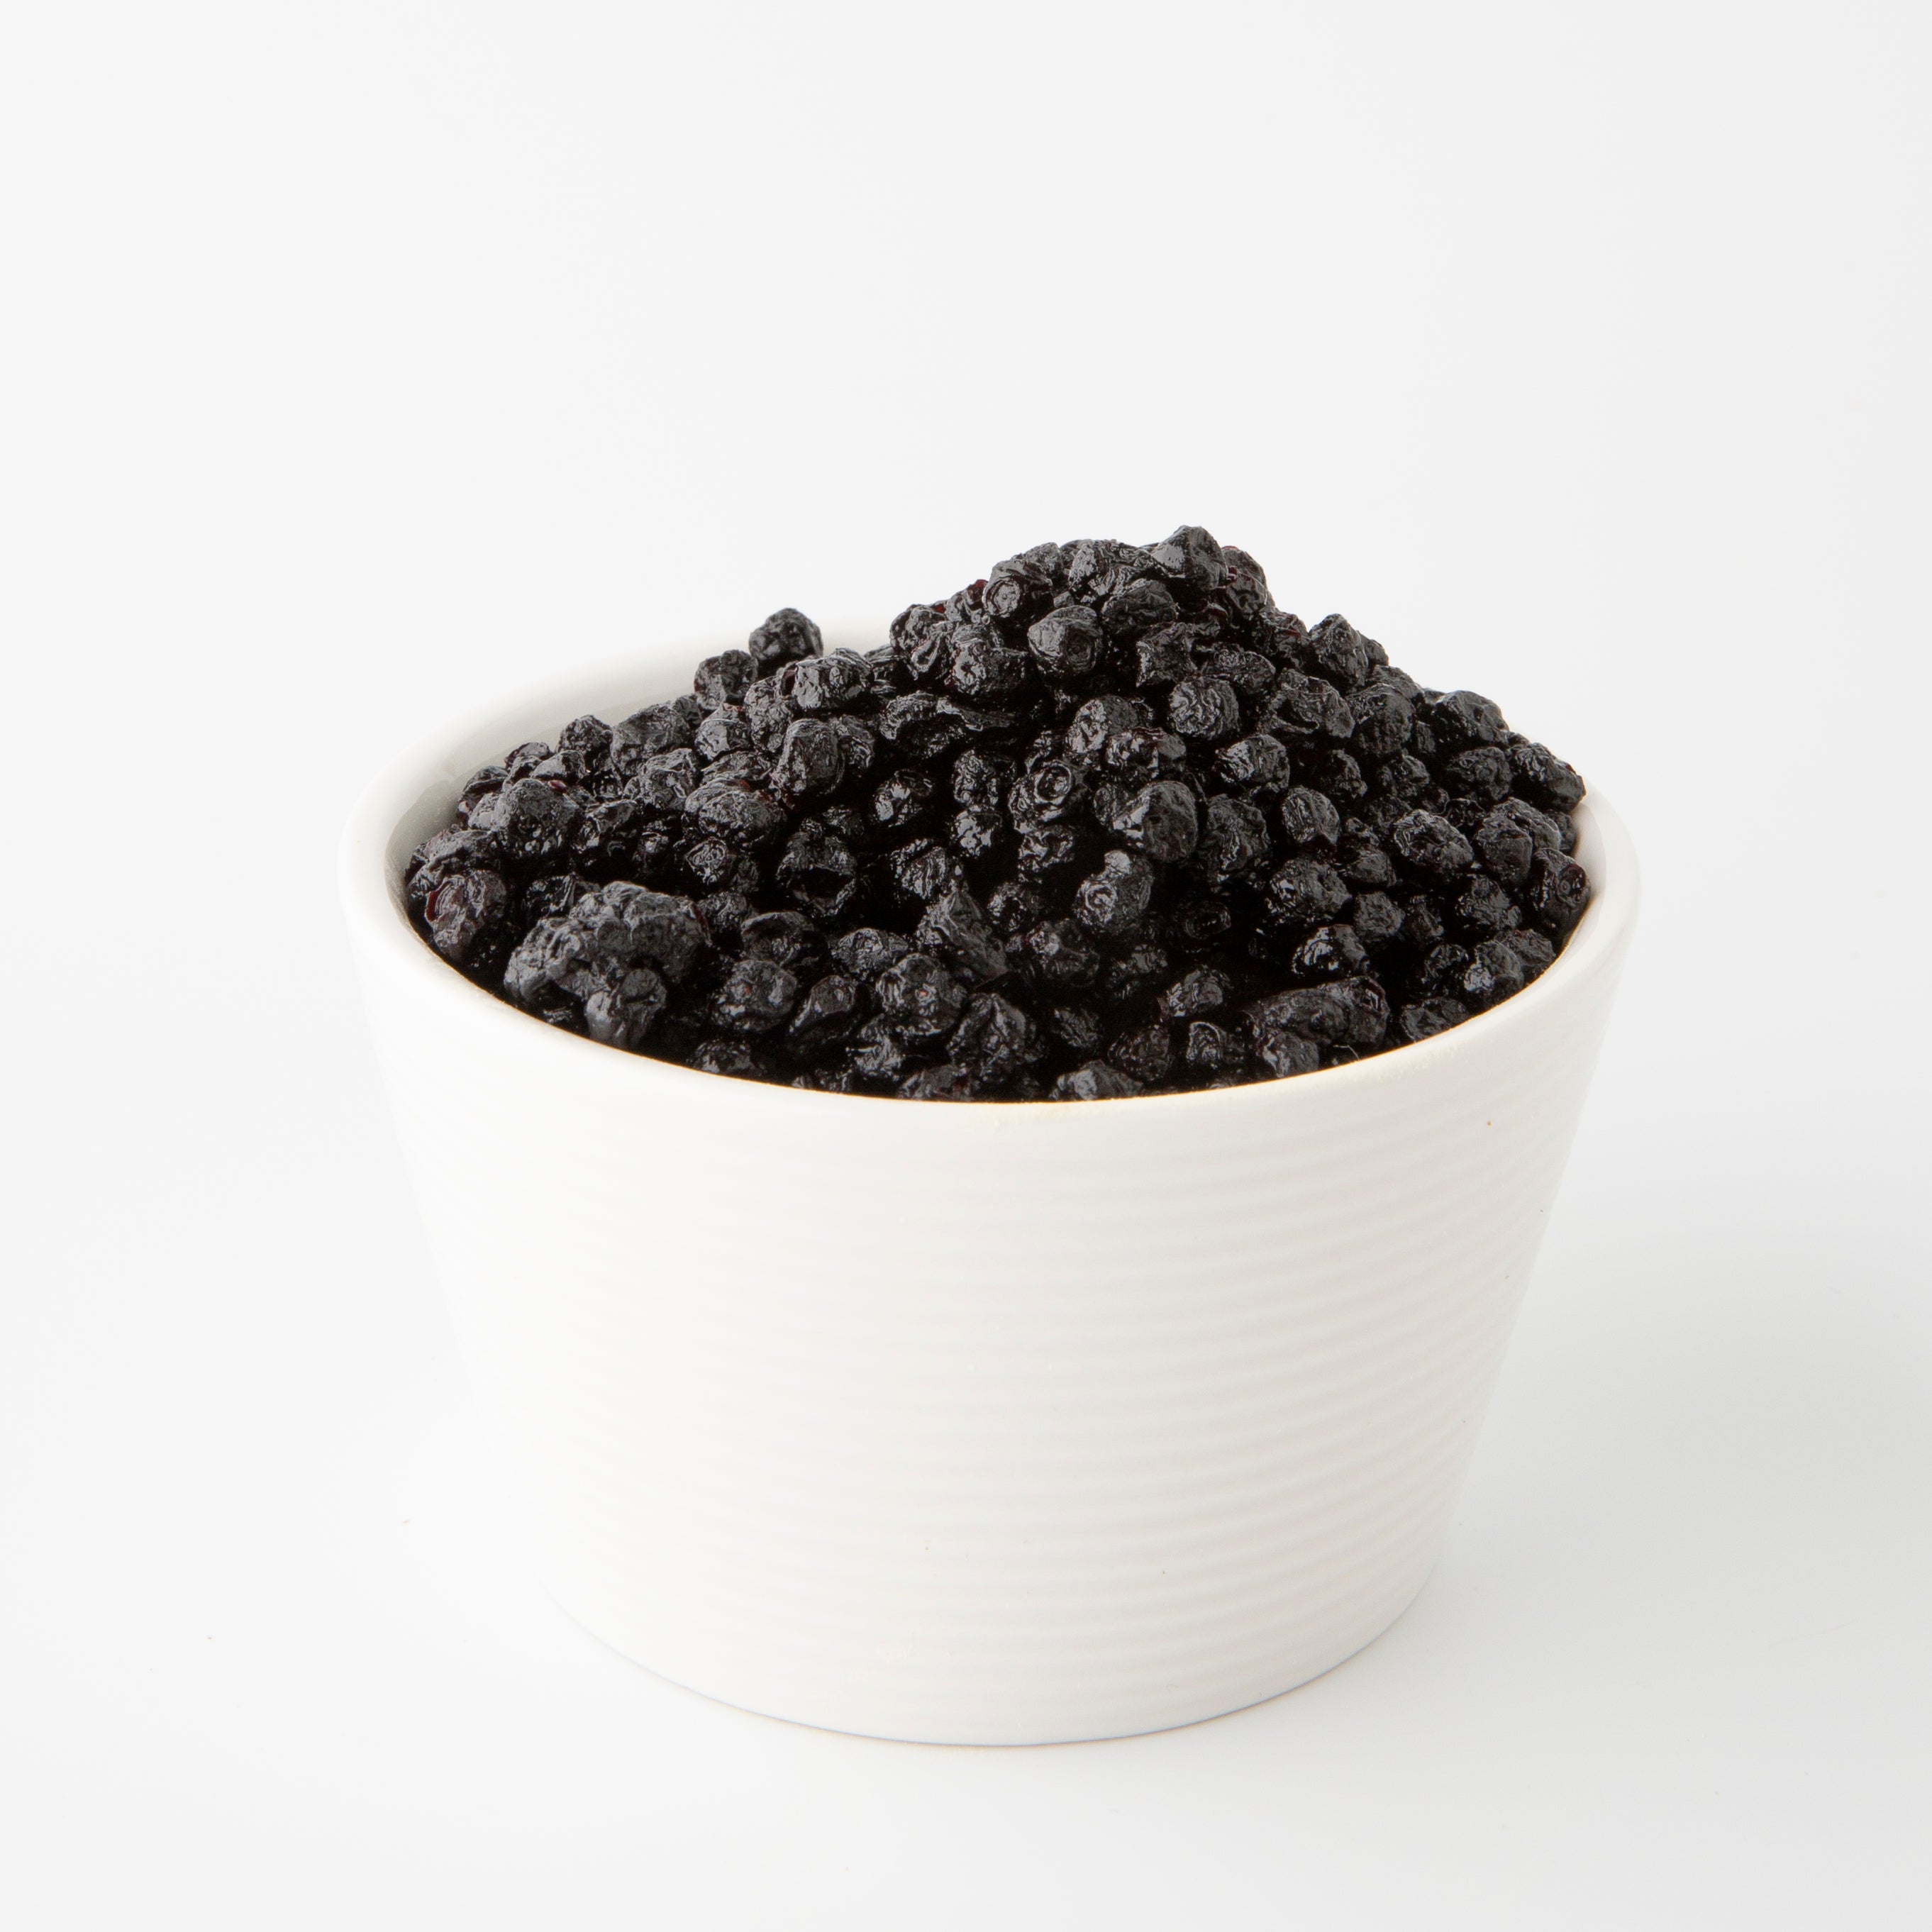 Organic Dried Blueberries (Dried Fruits) in white bowl - Naked Foods